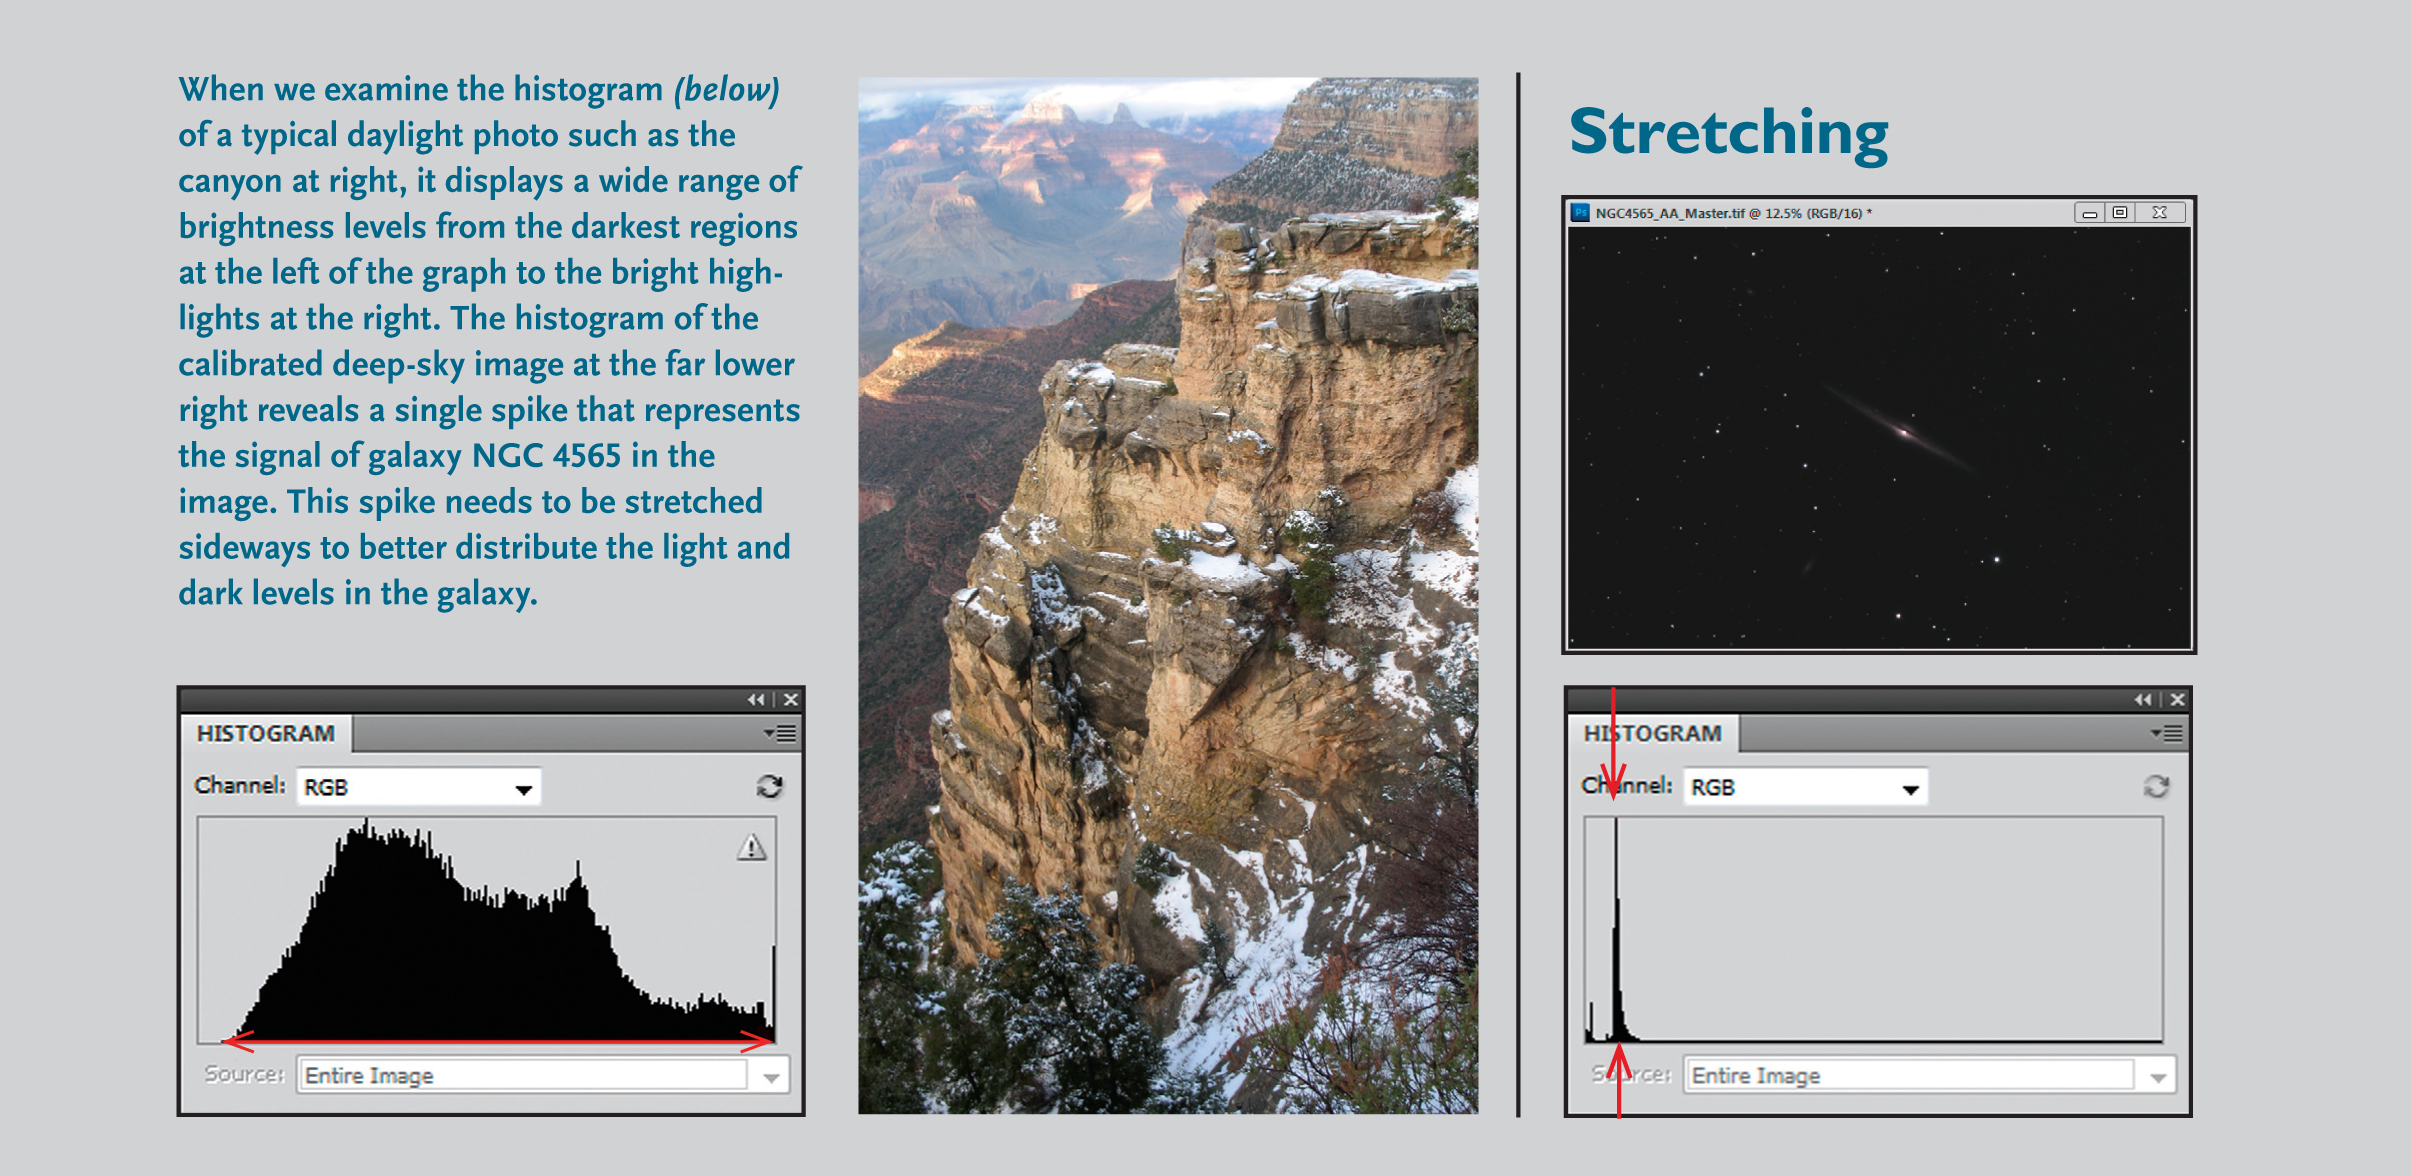 Stretching Images after taking them using CCD imaging.